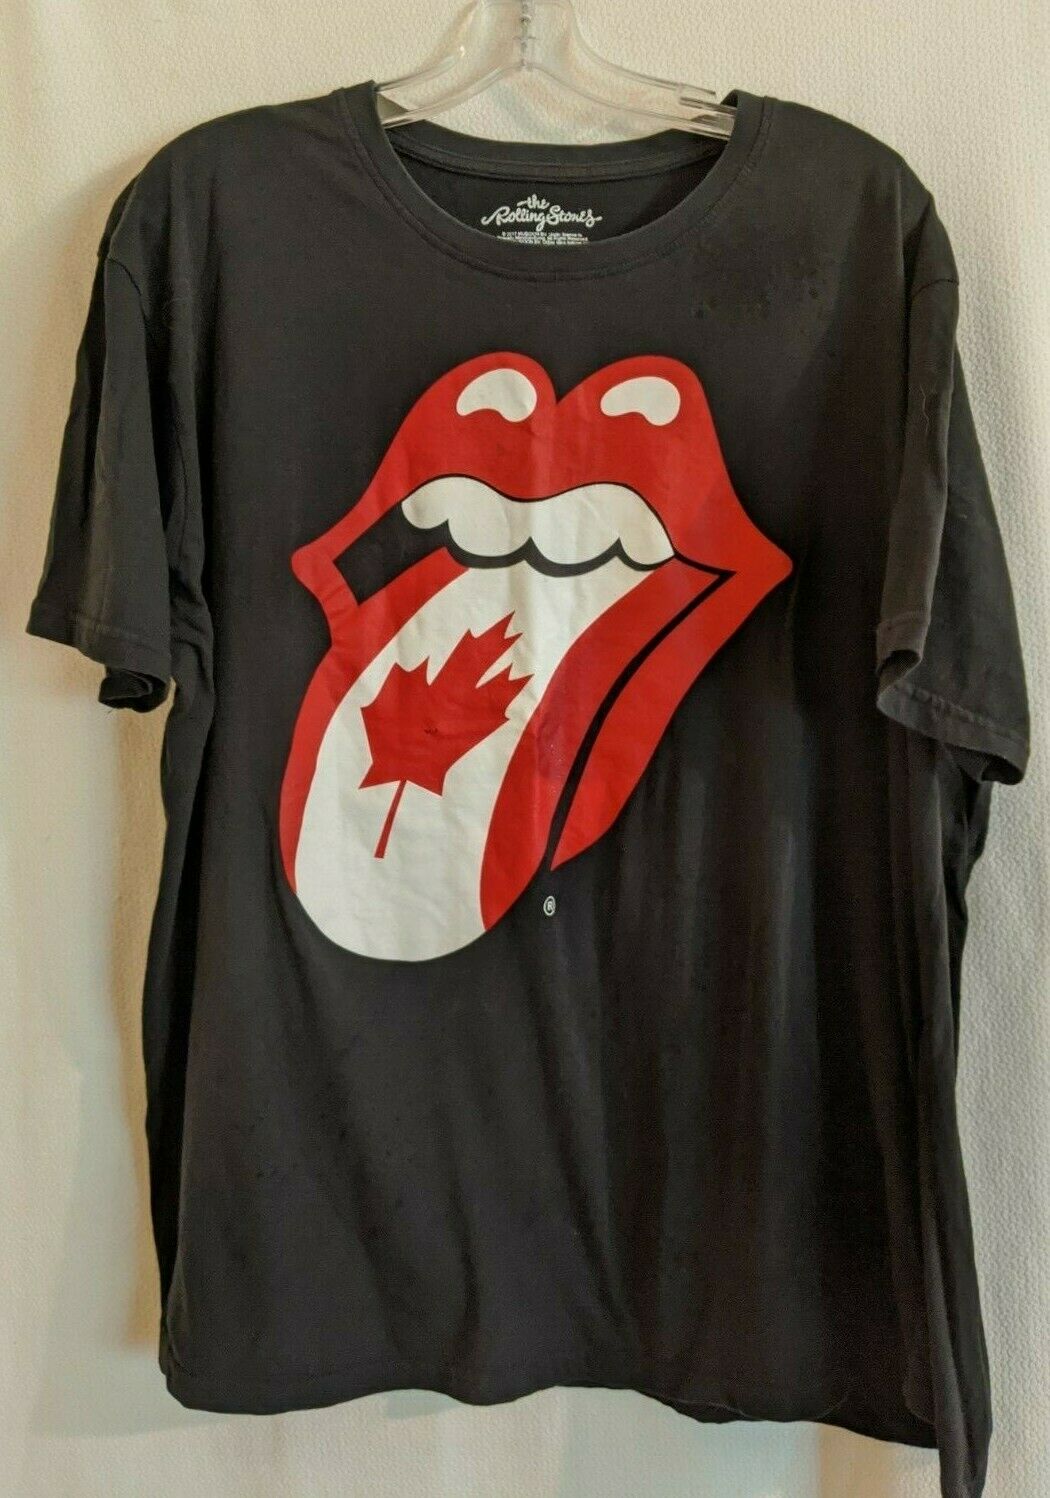 Classic Rolling Stones Jagger Canada Black With Tongue T Shirt T-shirt 2xl 2017